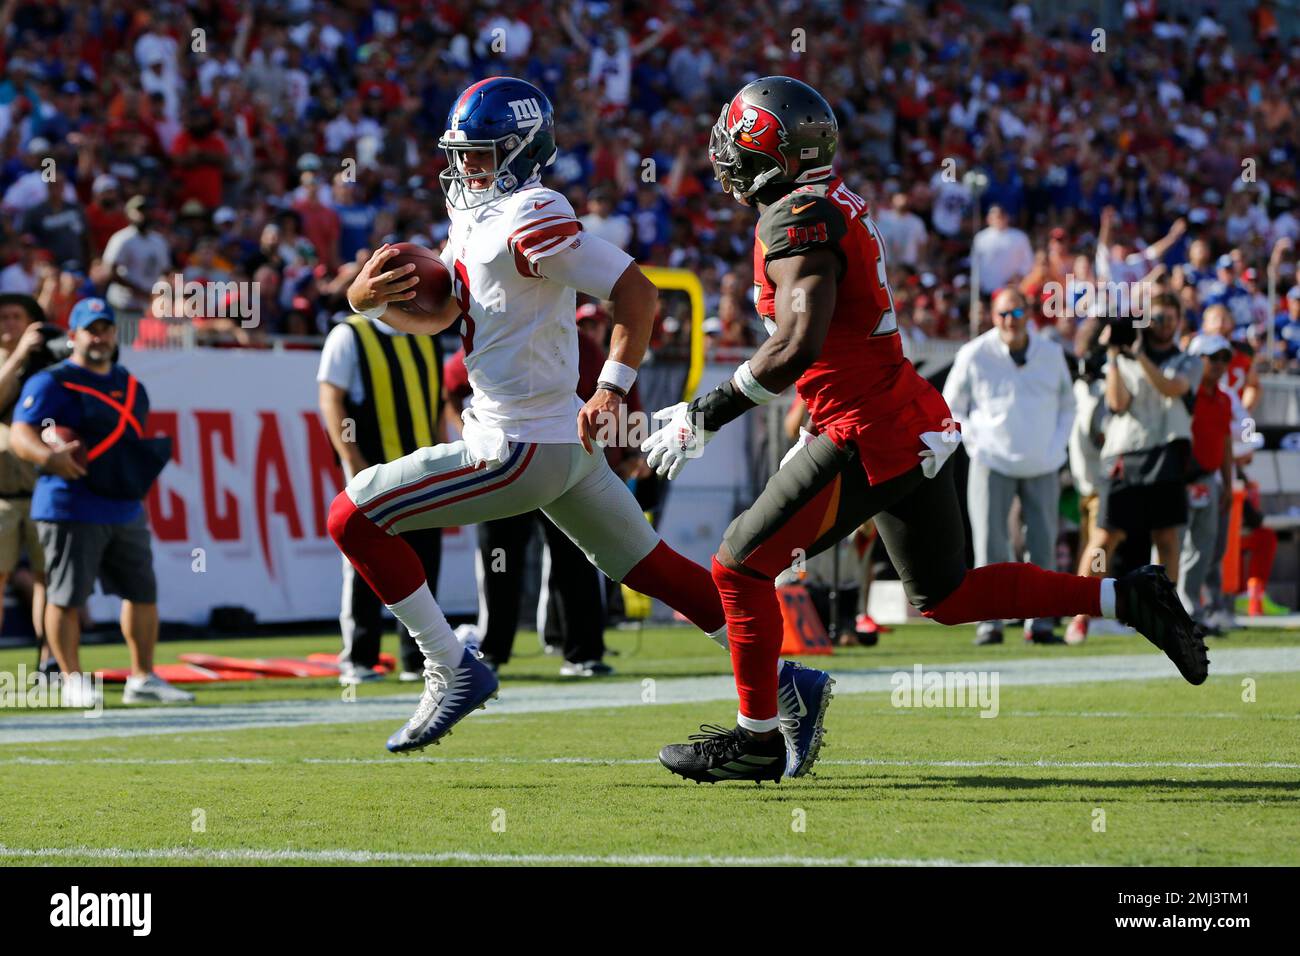 New York Giants quarterback Daniel Jones (8) runs by Tampa Bay Buccaneers cornerback M.J. Stewart for a score during the first half of an NFL football game Sunday, Sept. 22, 2019, in Tampa, Fla. (AP Photo/Mark LoMoglio) Stock Photo